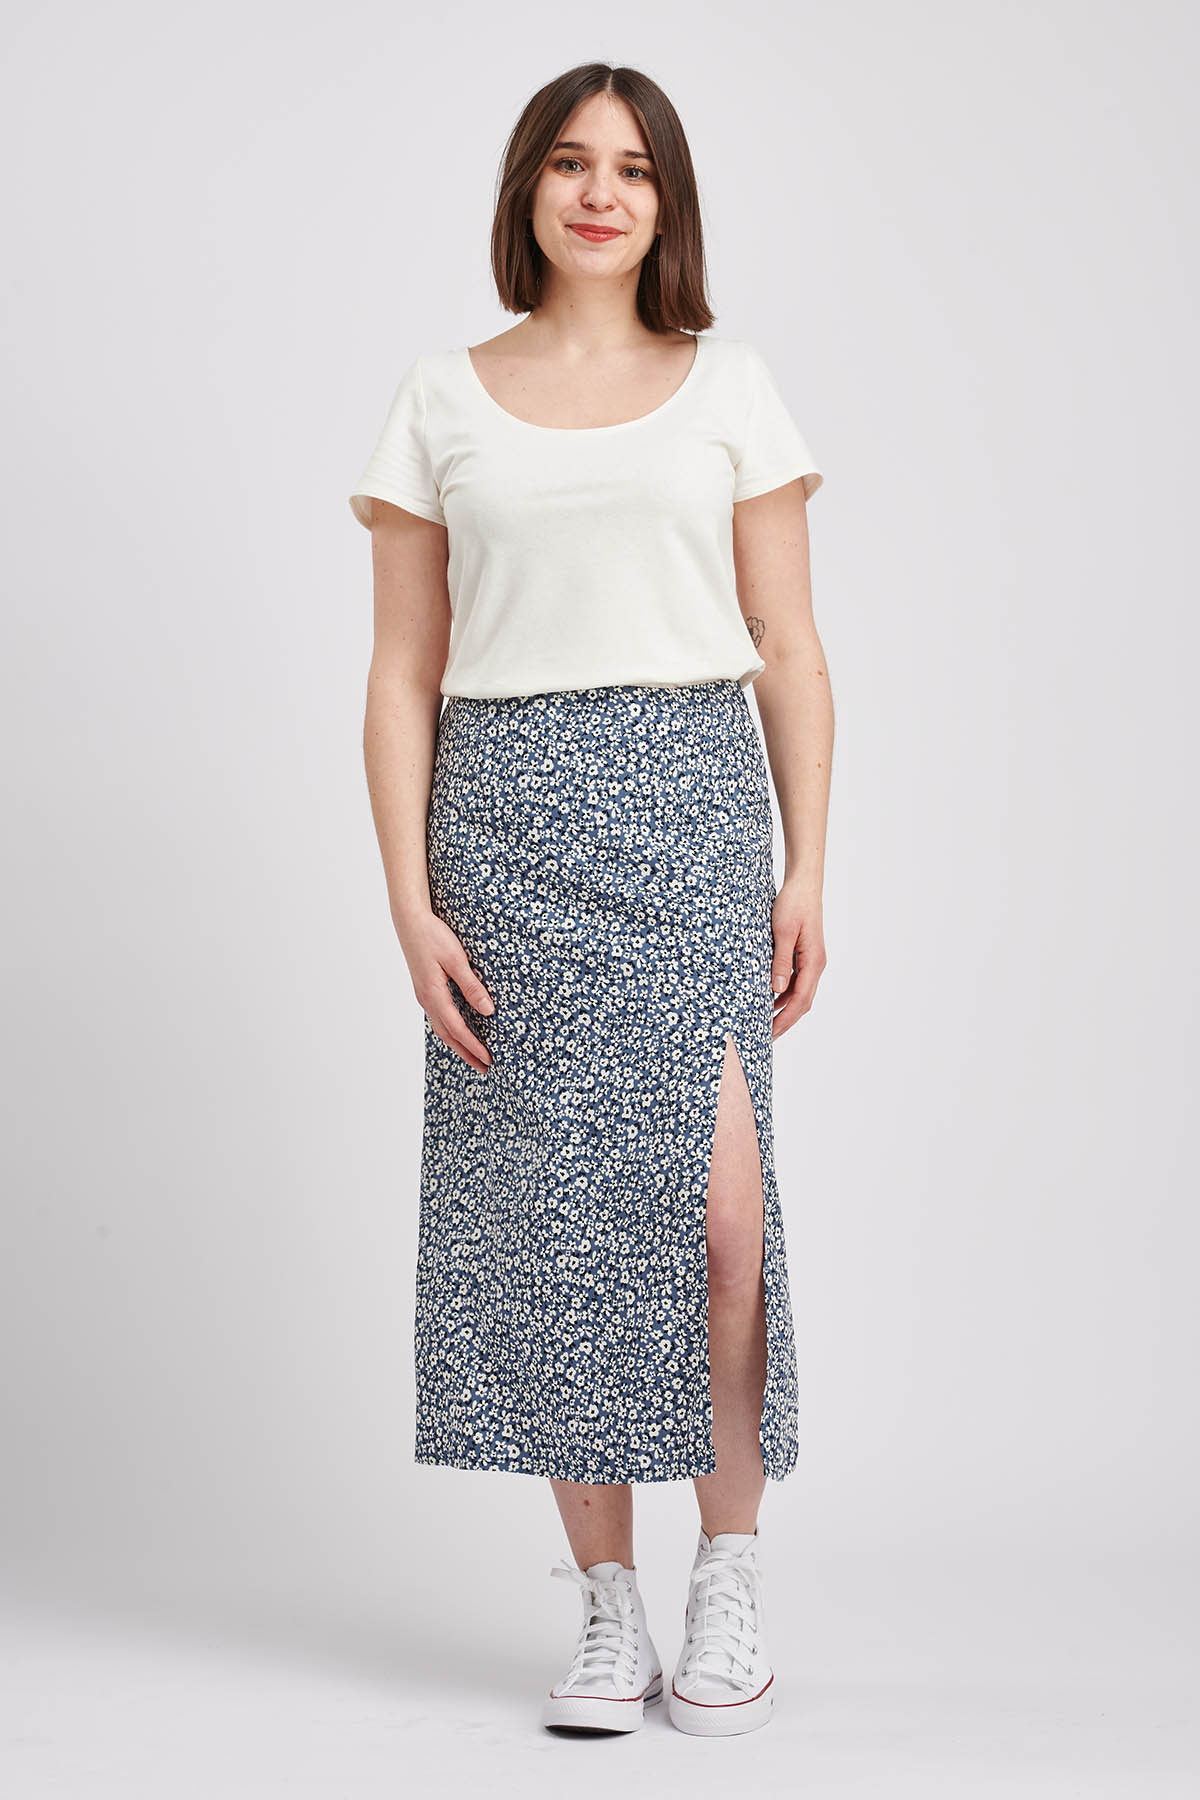 Woman wearing the Rachel Skirt sewing pattern from I AM Patterns on The Fold Line. A skirt pattern made in tencel, viscose, lightweight denim, cotton lawn, crêpe, chambray, cupro, linen, satin, and silk fabrics, featuring a mid-thigh front slit, slightly 